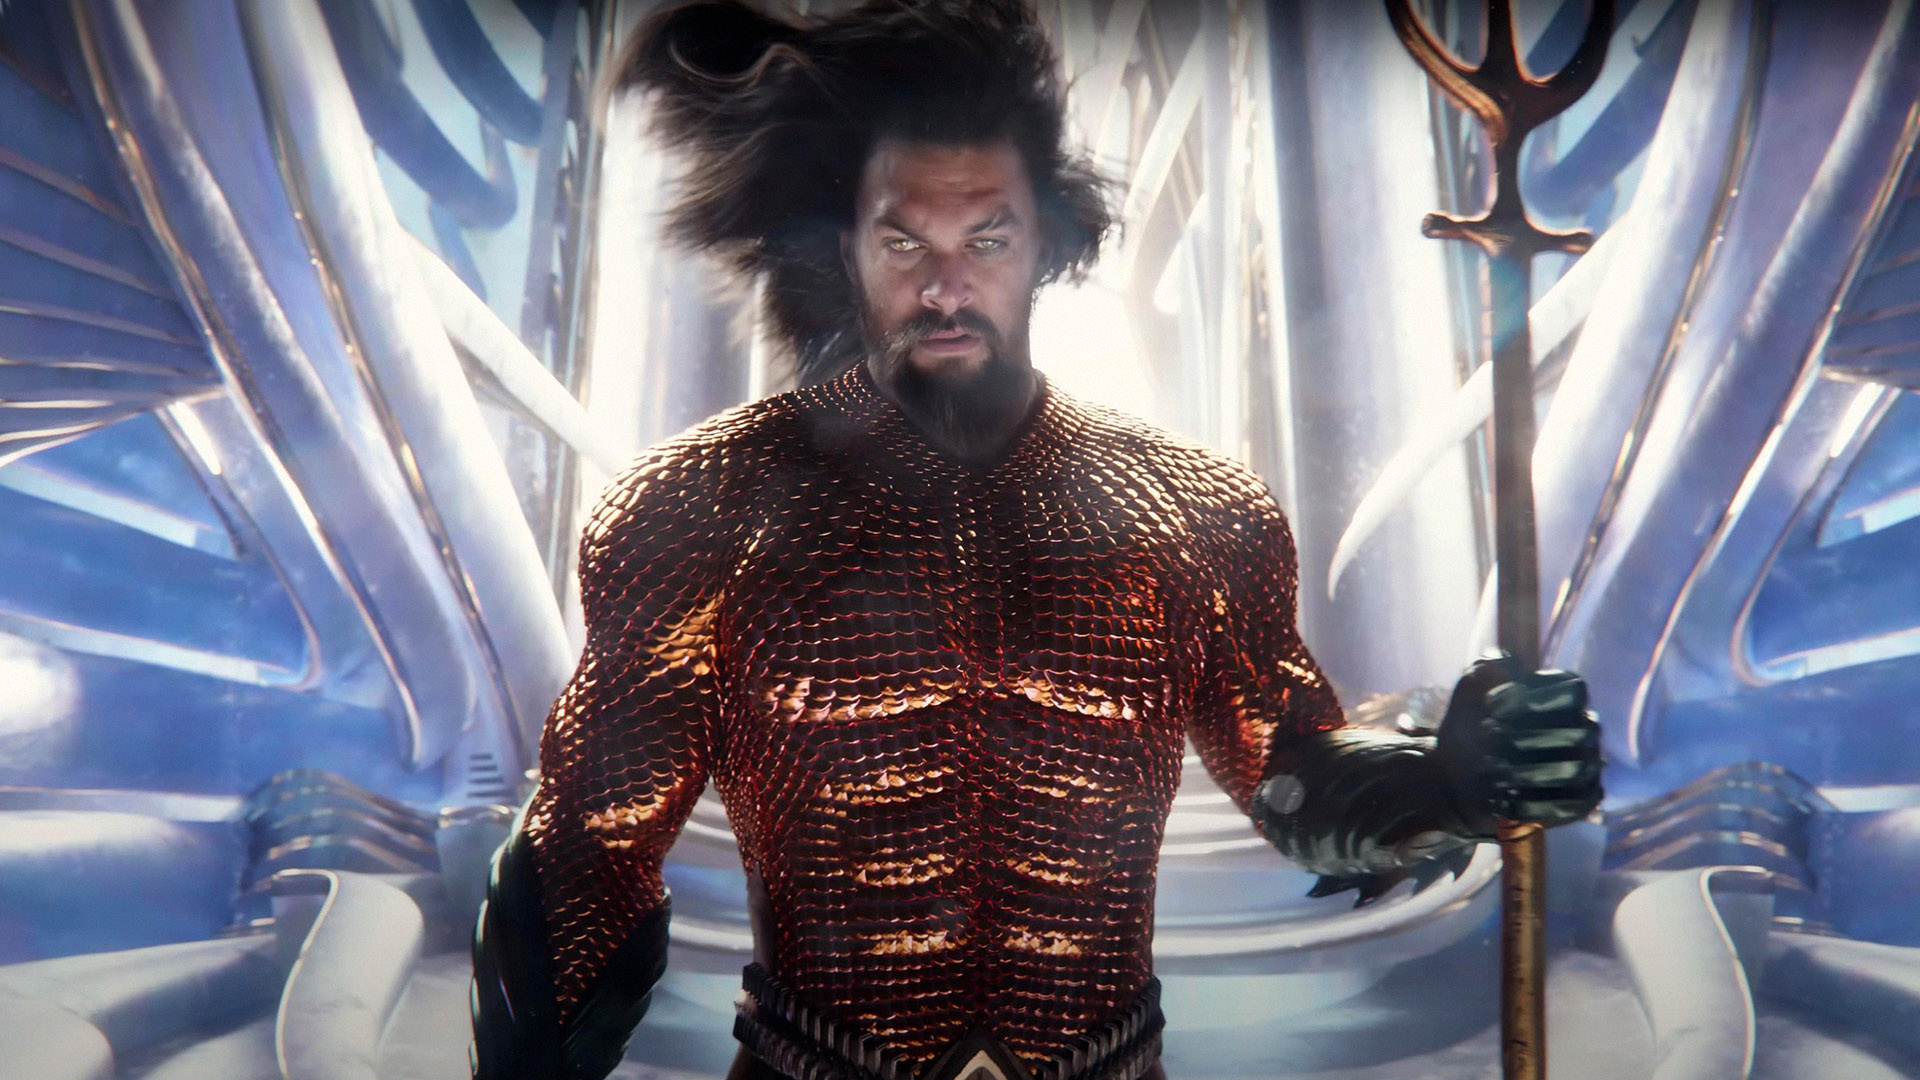 5 Most Important Takeaways From the Aquaman 2 Trailer Teaser